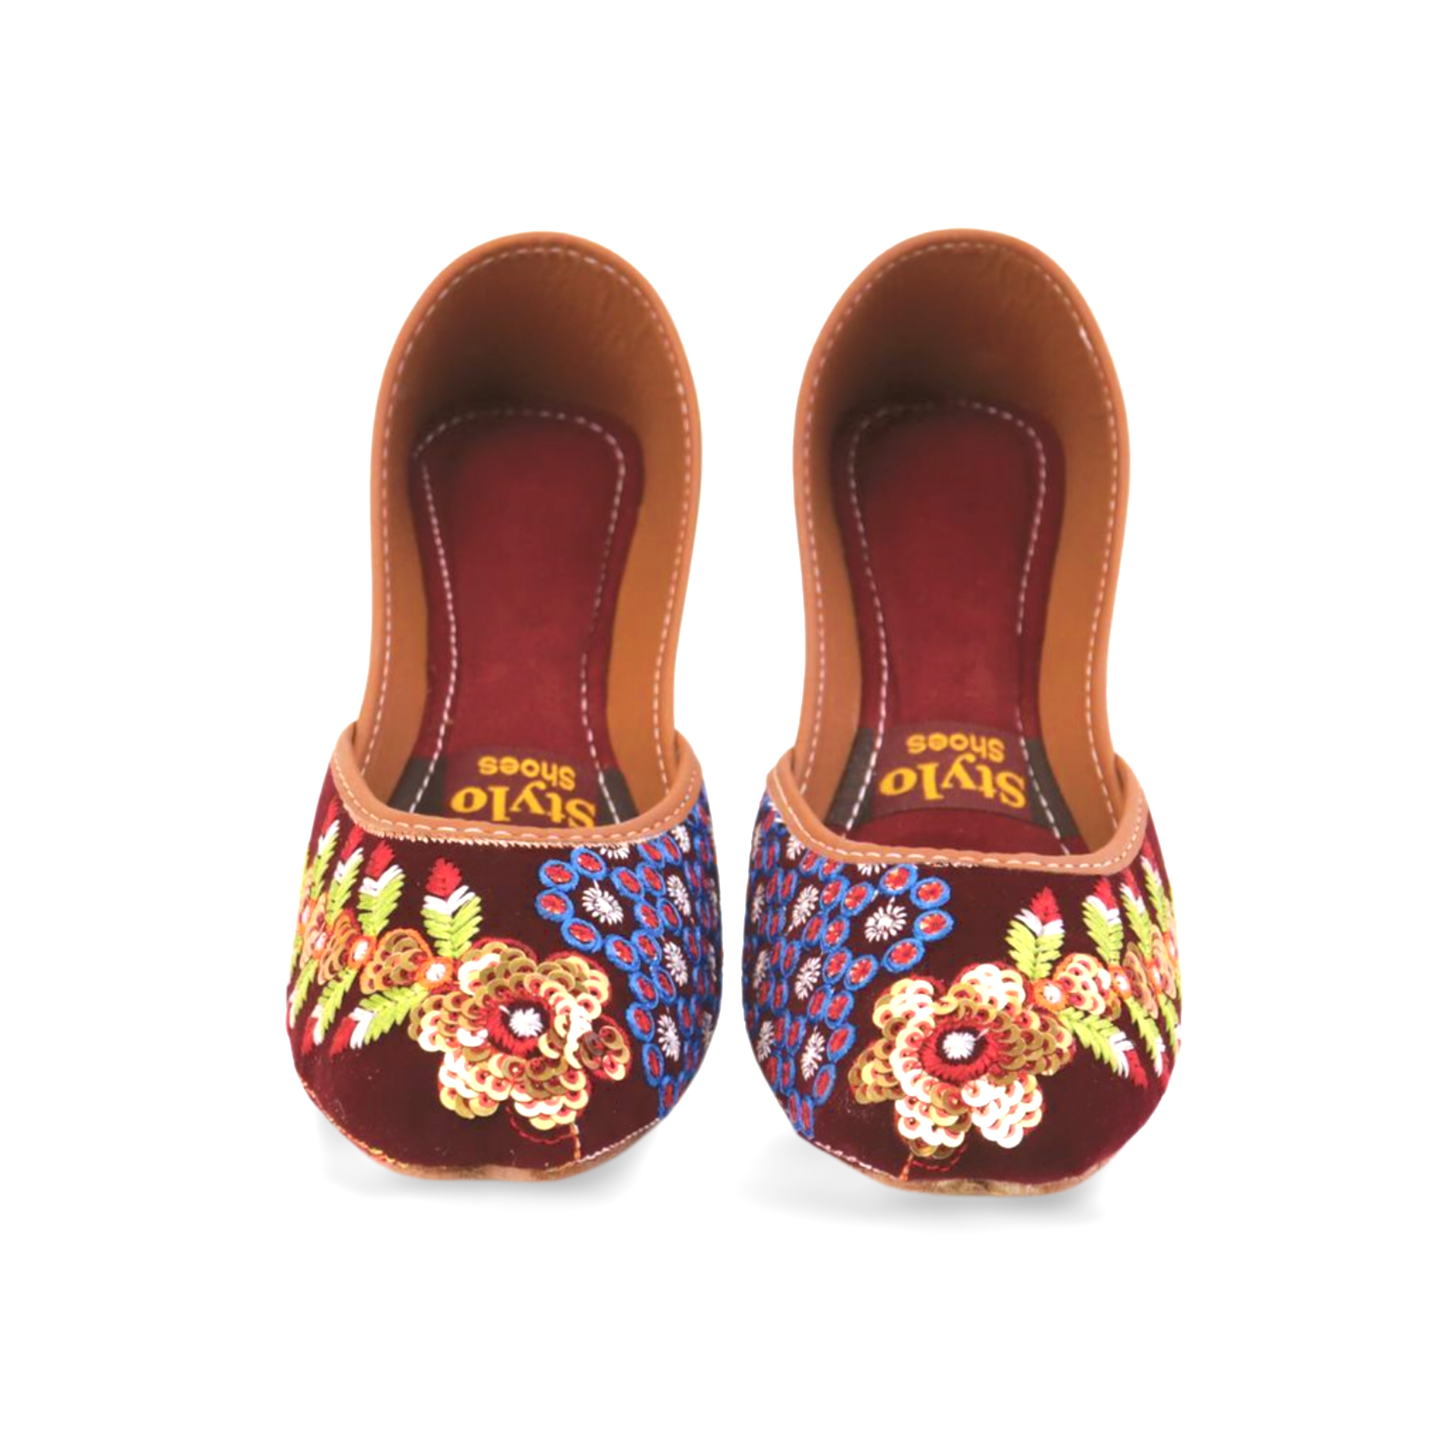 Stylish Velvet Embroidered Khussa for Girls - Traditional Pakistani Footwear with a Modern Twist